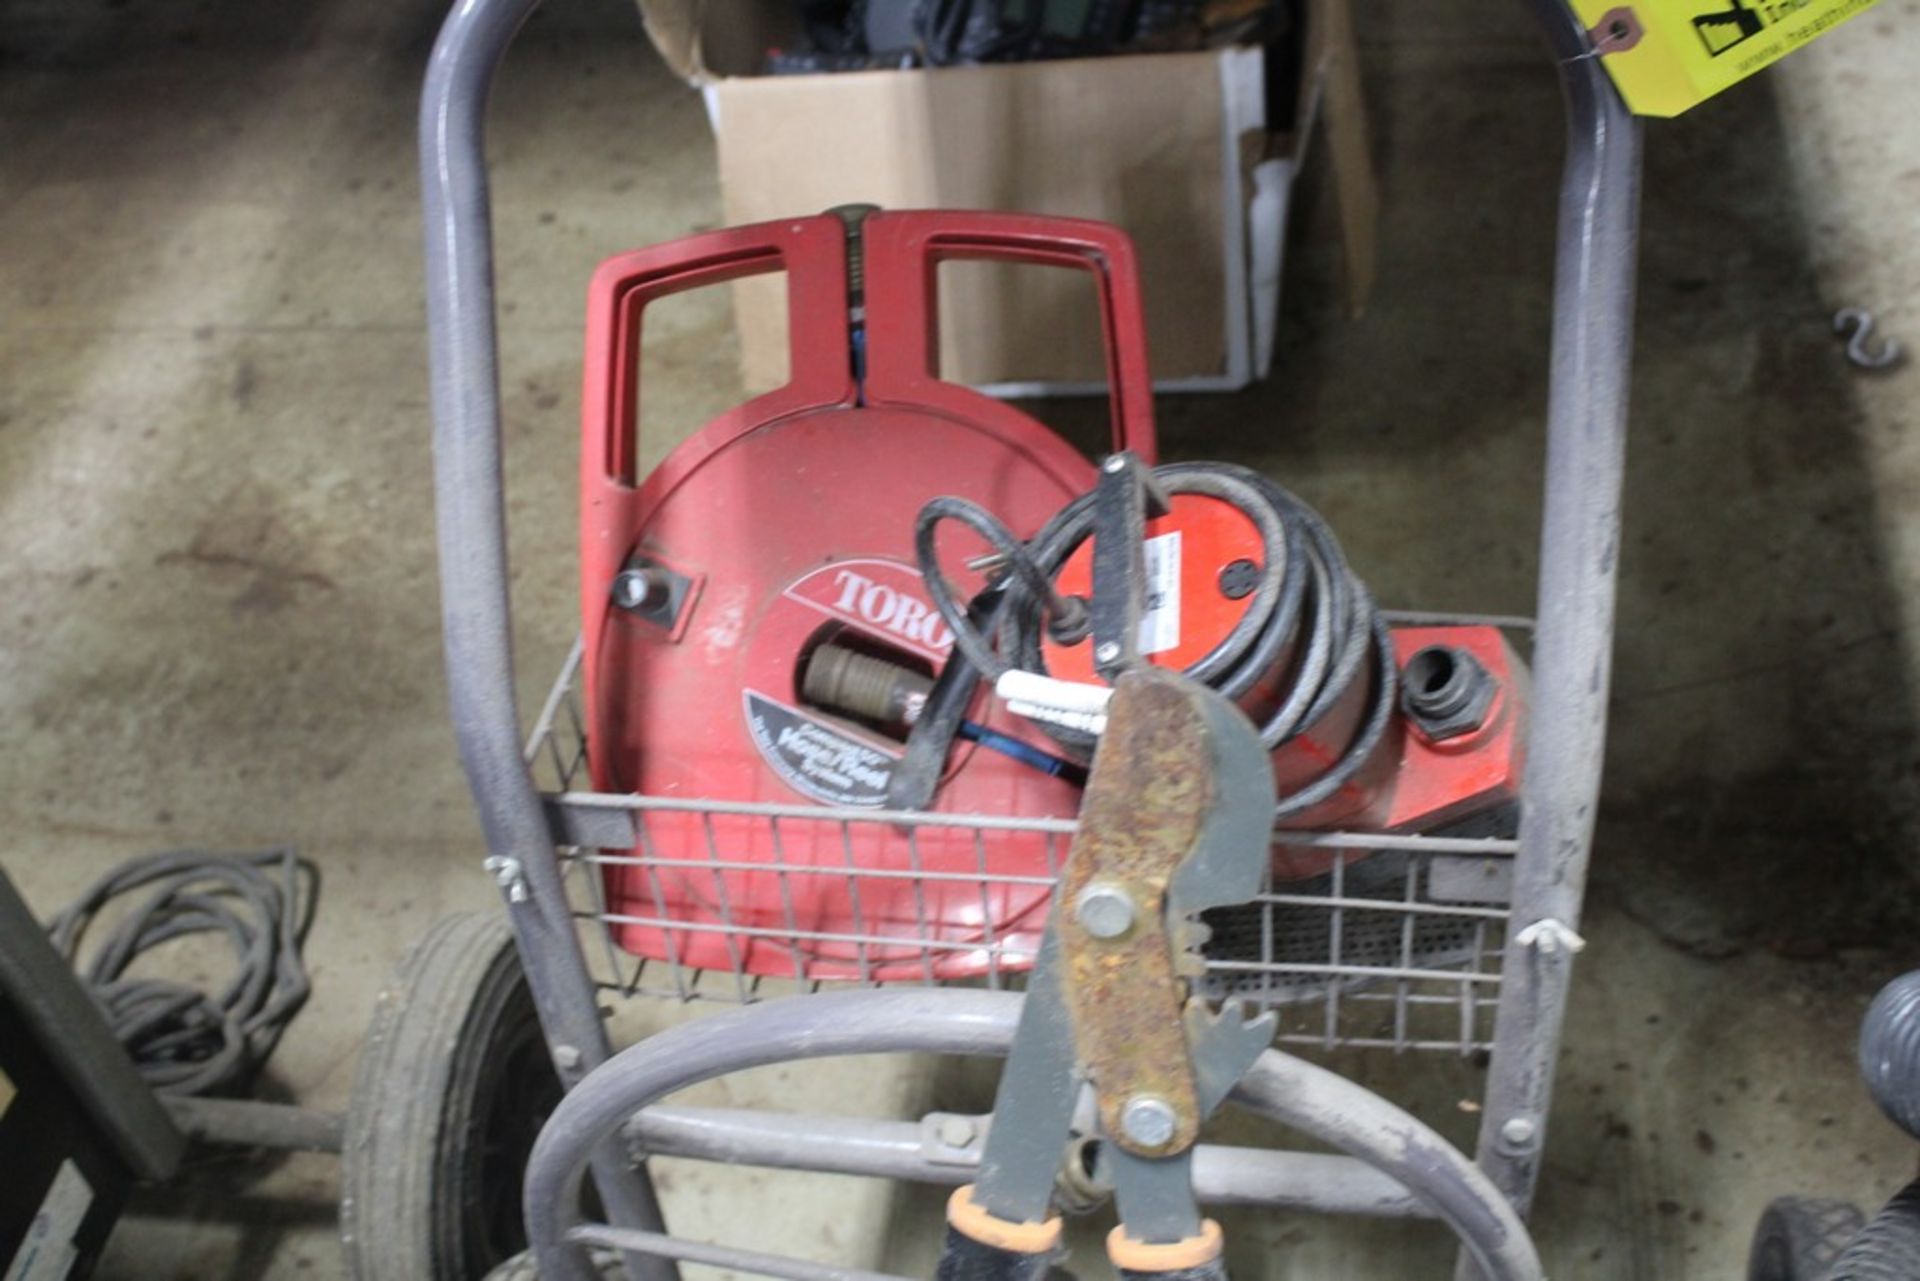 PORTABLE HOSE REEL WITH PNEUMATIC TIRES, TORO 50' COMPACT HOSE REEL, SUBMERSIBLE PUMP AND BRANCH - Image 2 of 2